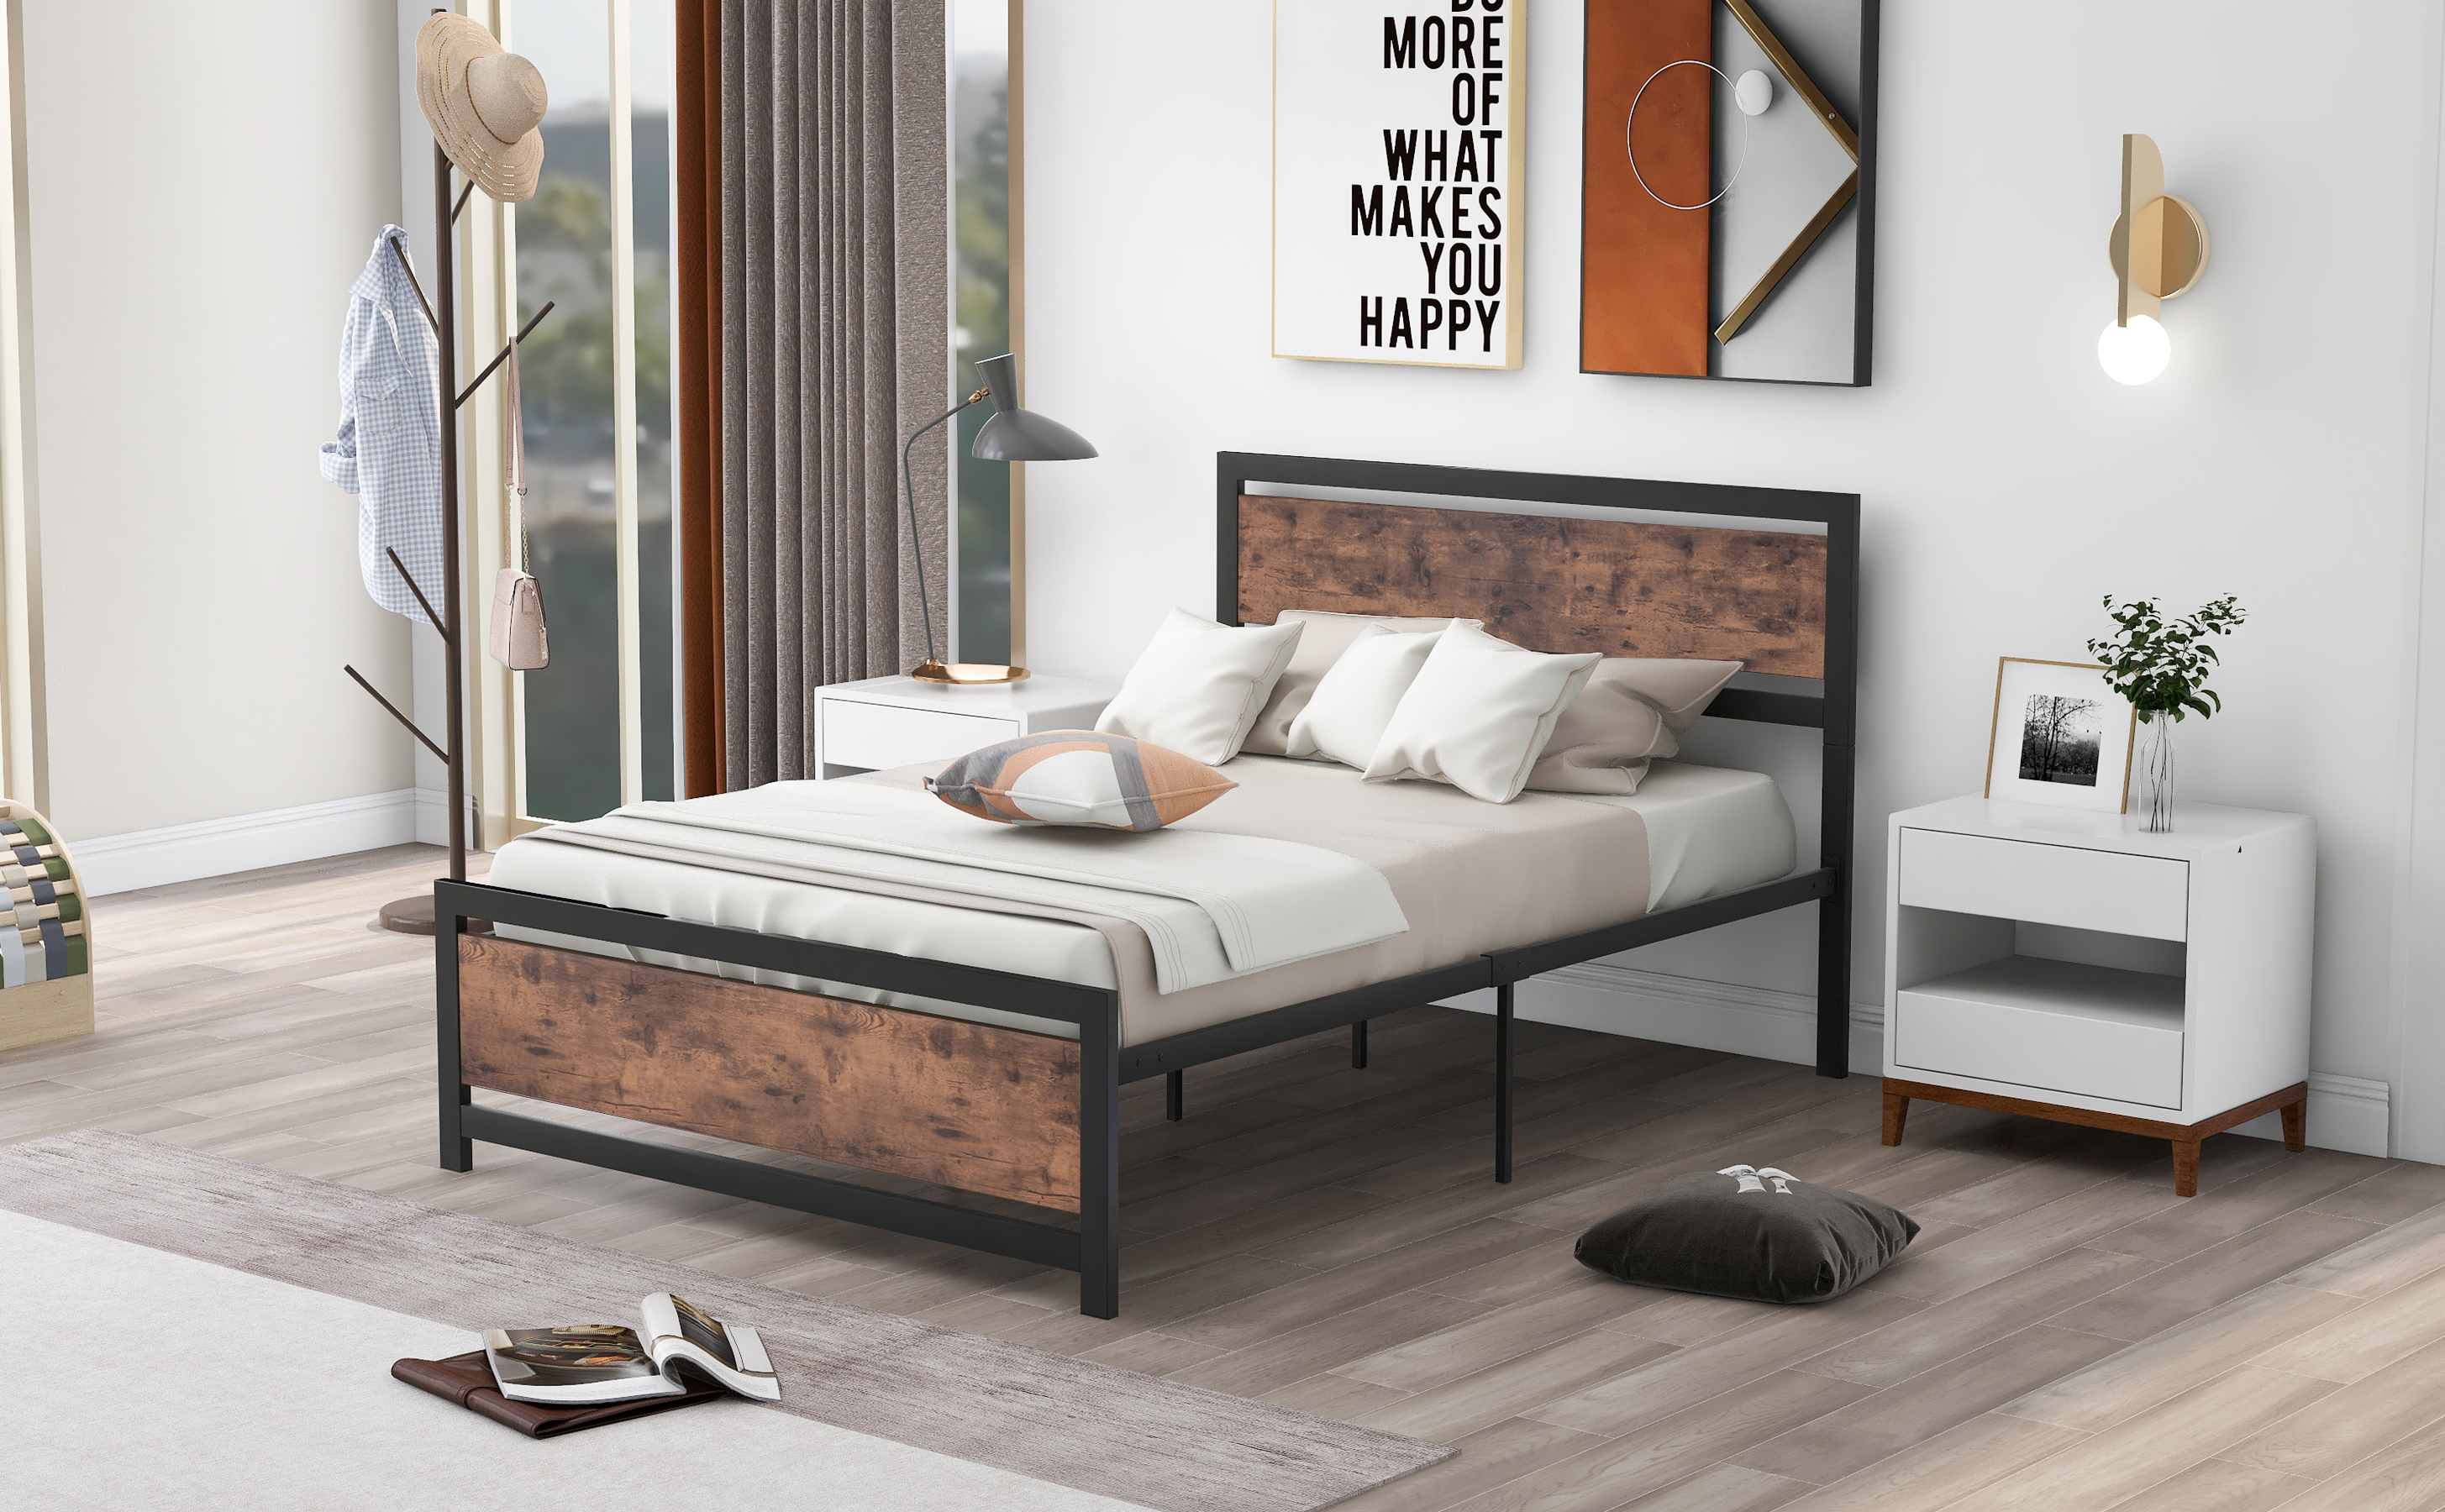 Metal and Wood Bed Frame with Headboard and Footboard, Full Size Platform Bed, No Box Spring Needed, Easy to Assemble (Black)